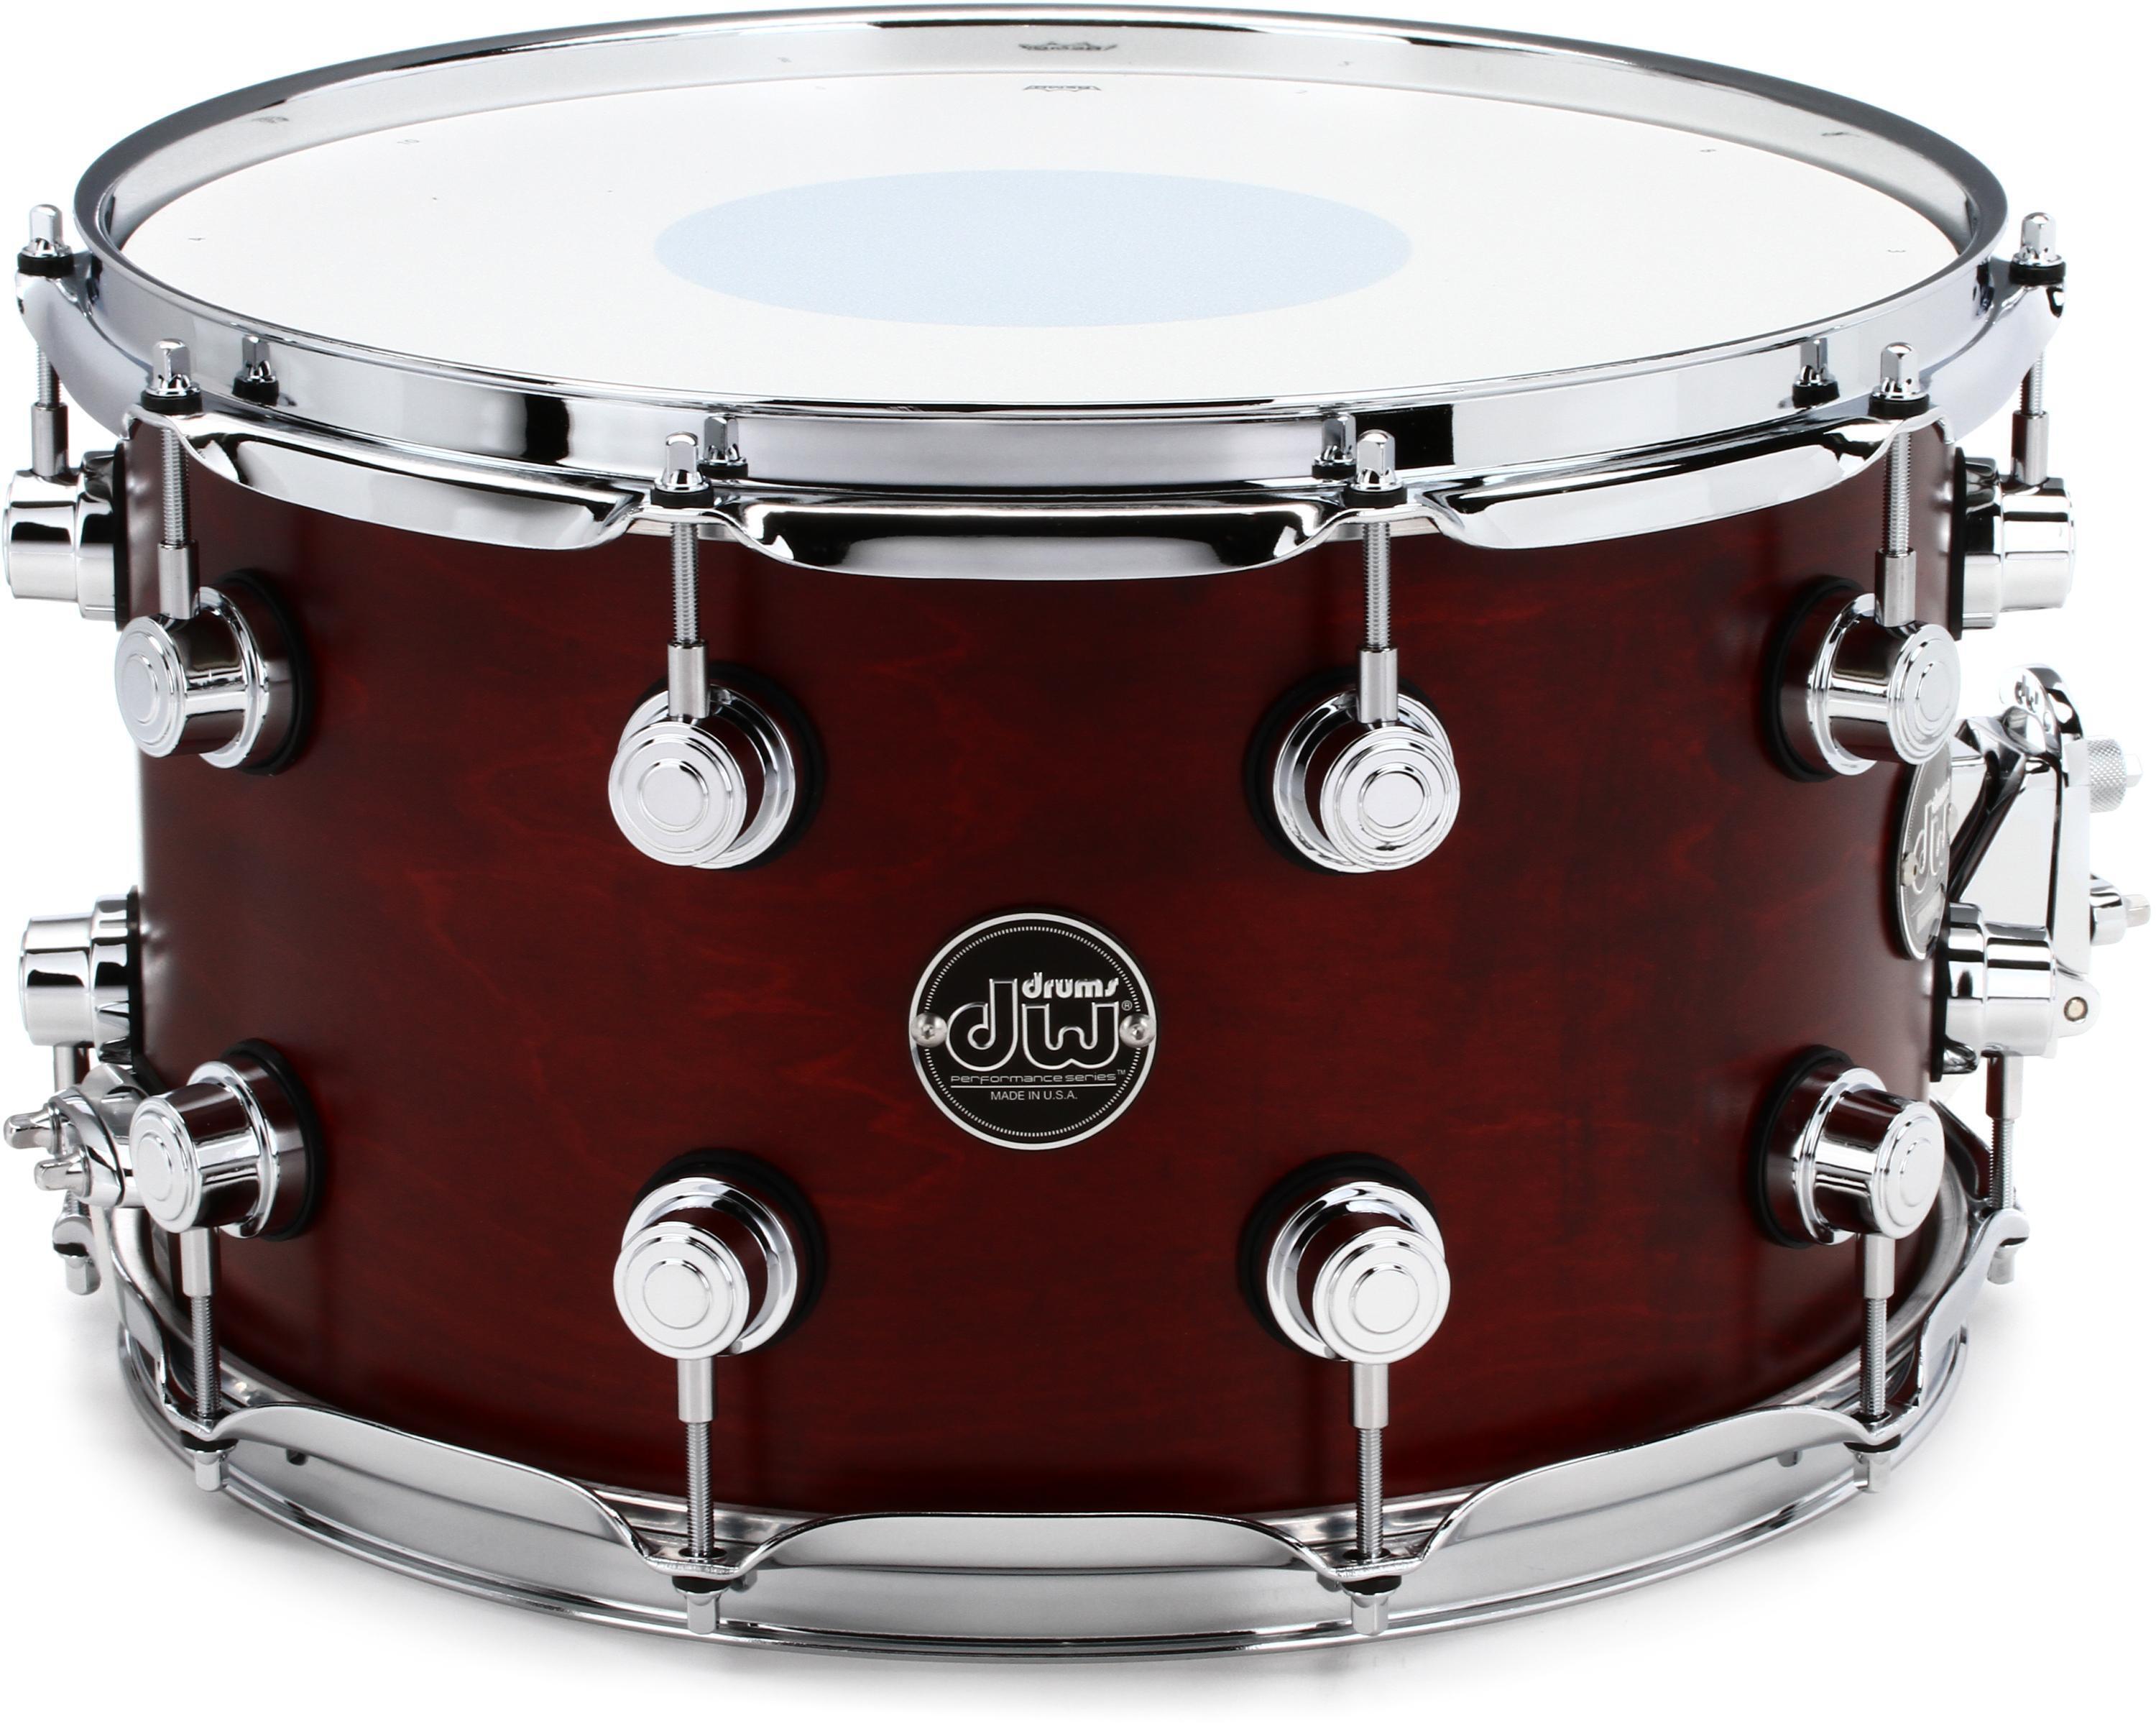 DW Performance Series Snare Drum - 8 x 14 inch - Tobacco Satin Oil